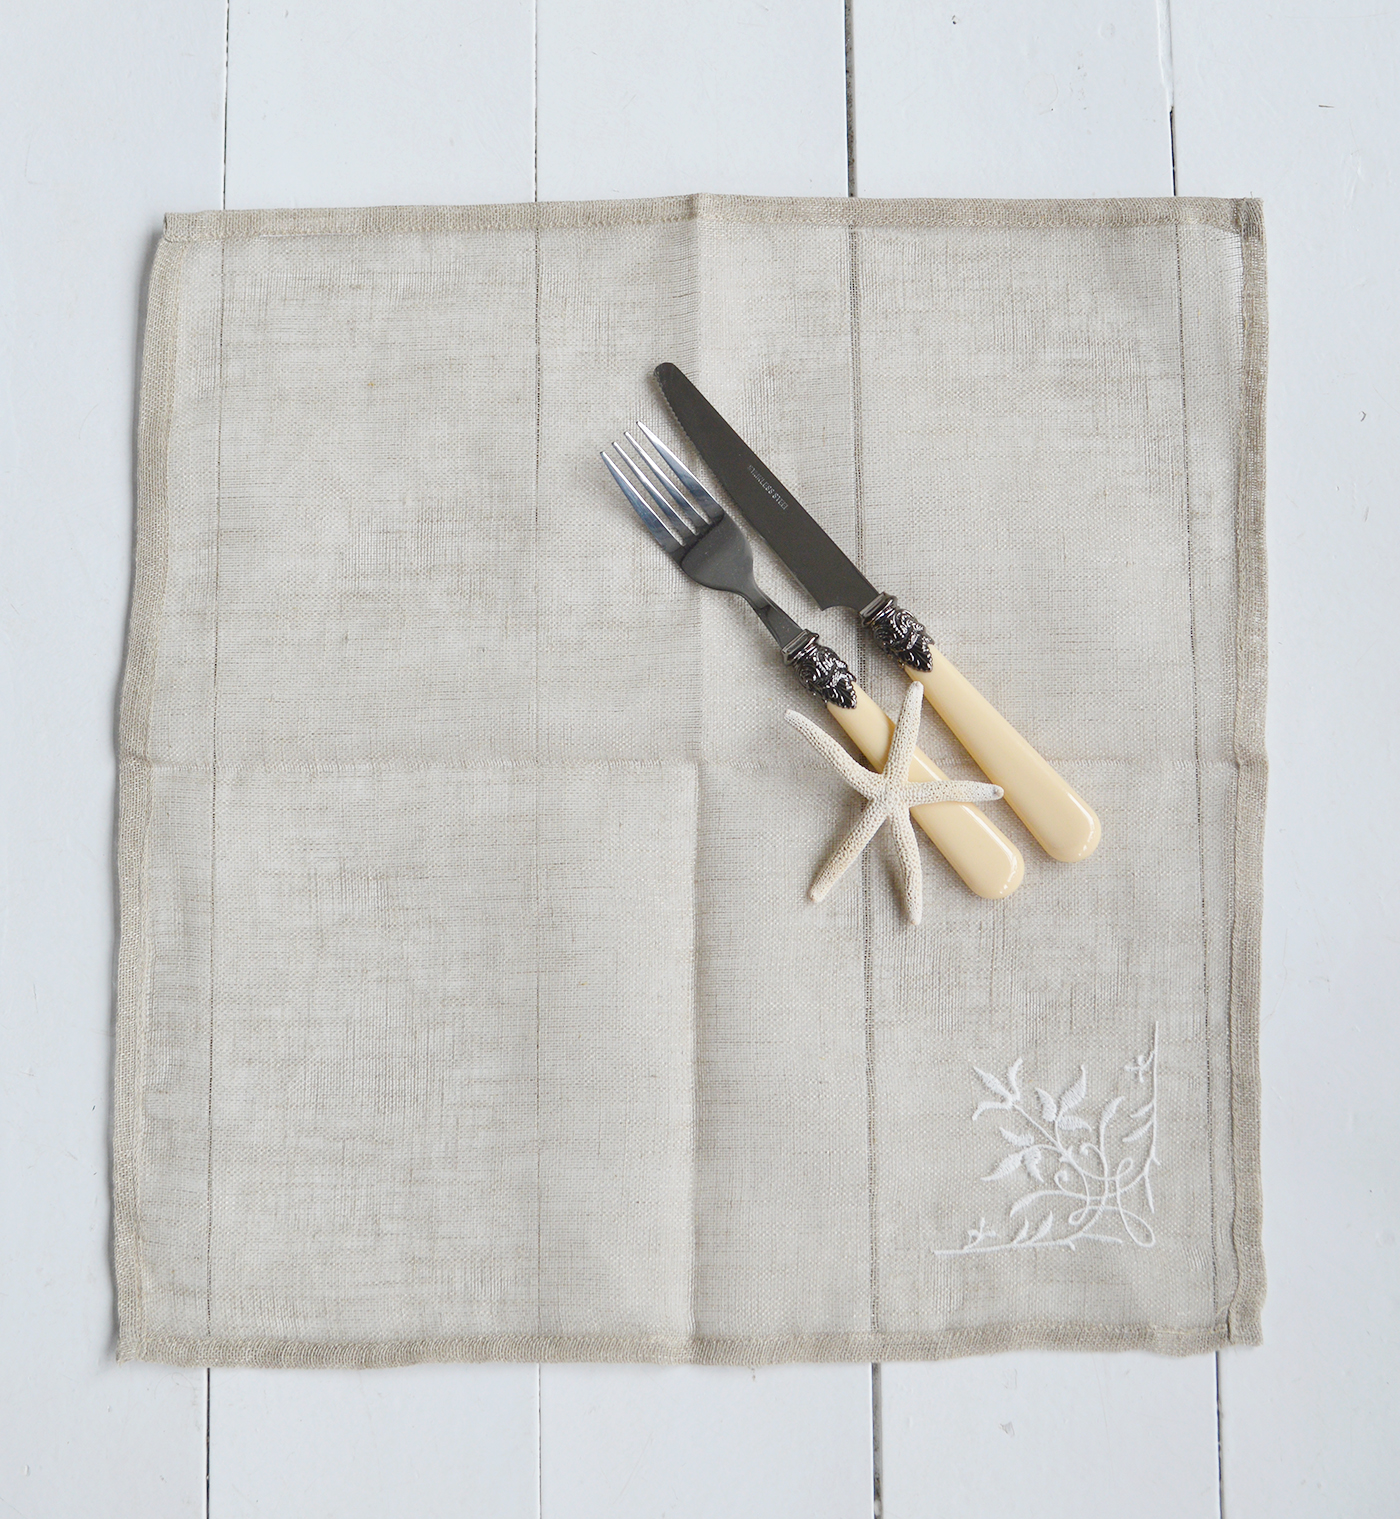 Linen Napkin Placemat - Table Centre Piece. White for New England Style interiors for coastal, country and city home interiors from The White Lighthouse